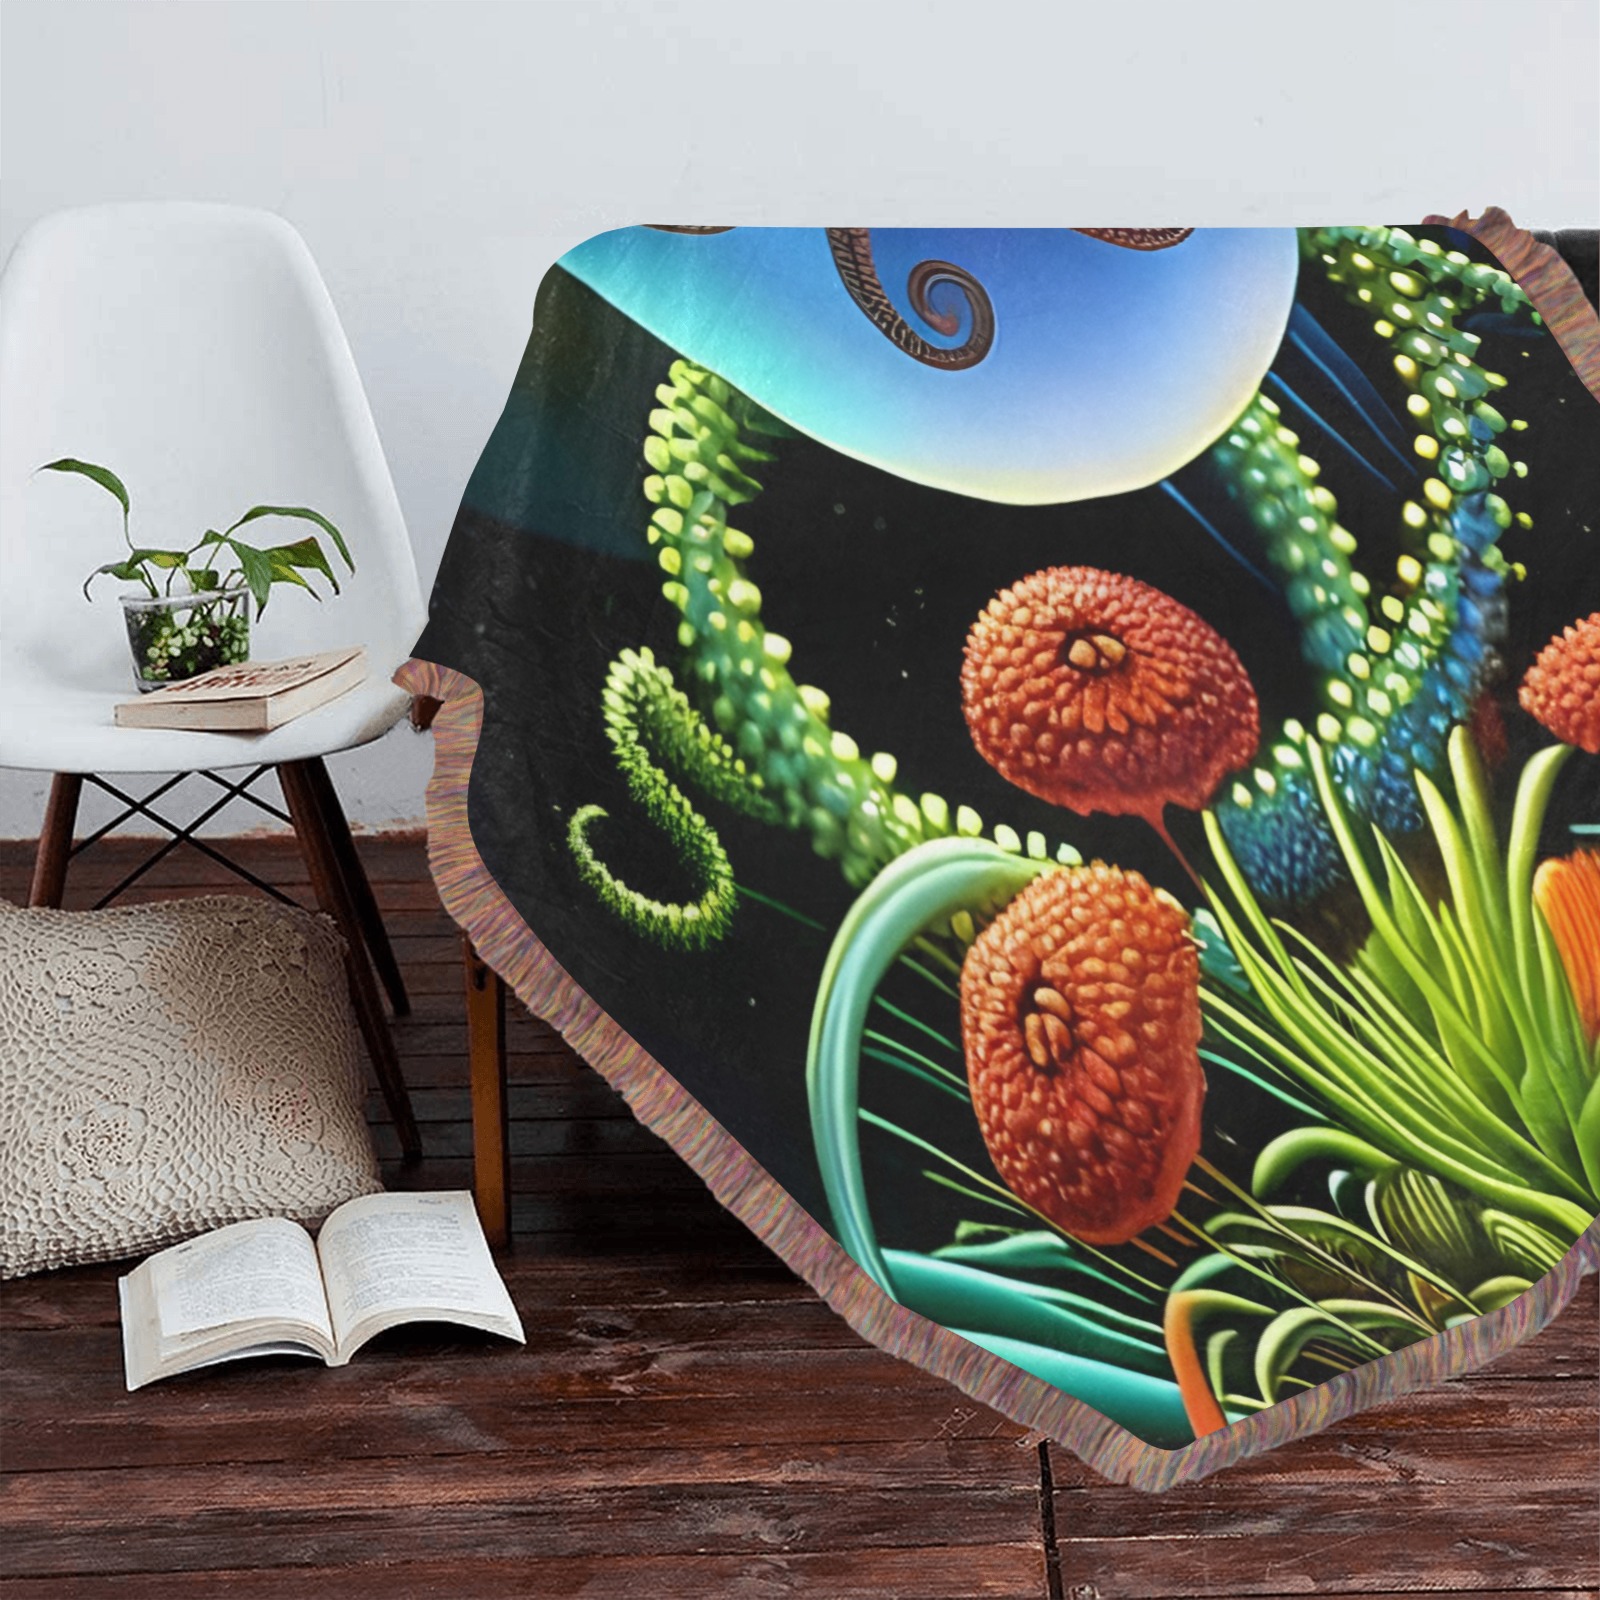 Out Of This World Spheres Octopus Ultra-Soft Fringe Blanket 60"x80" (Mixed Green)